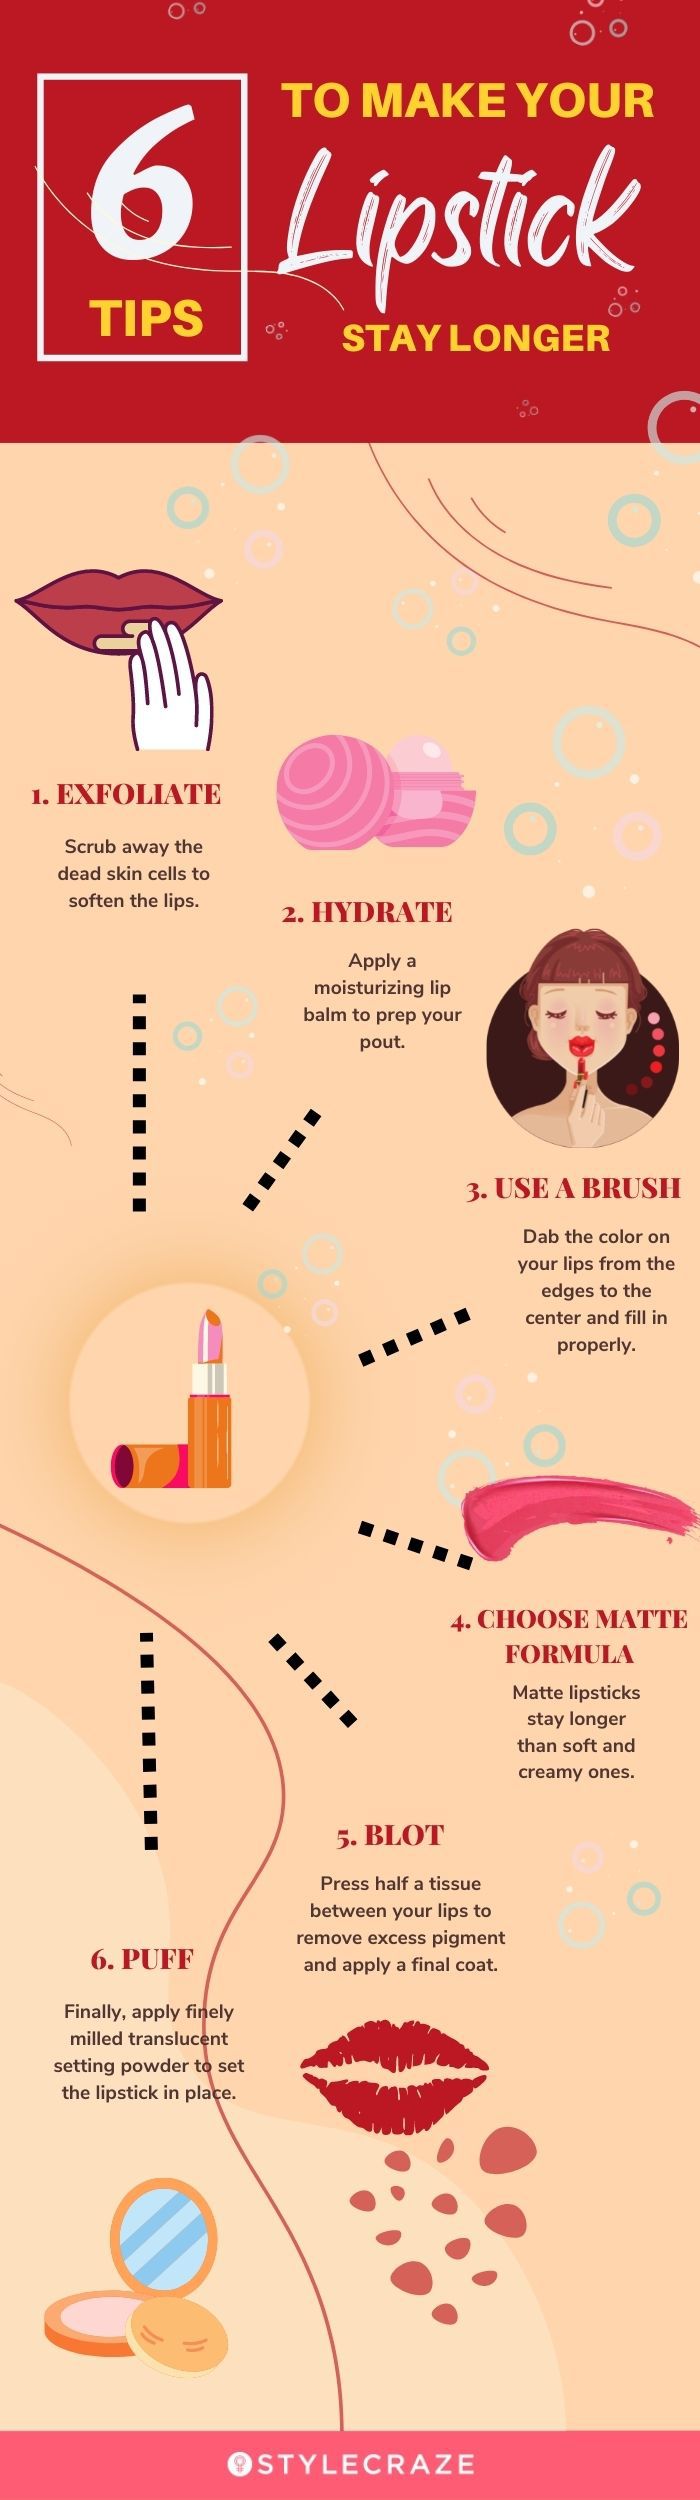 tips to make your lipstick stay longer (infographic)